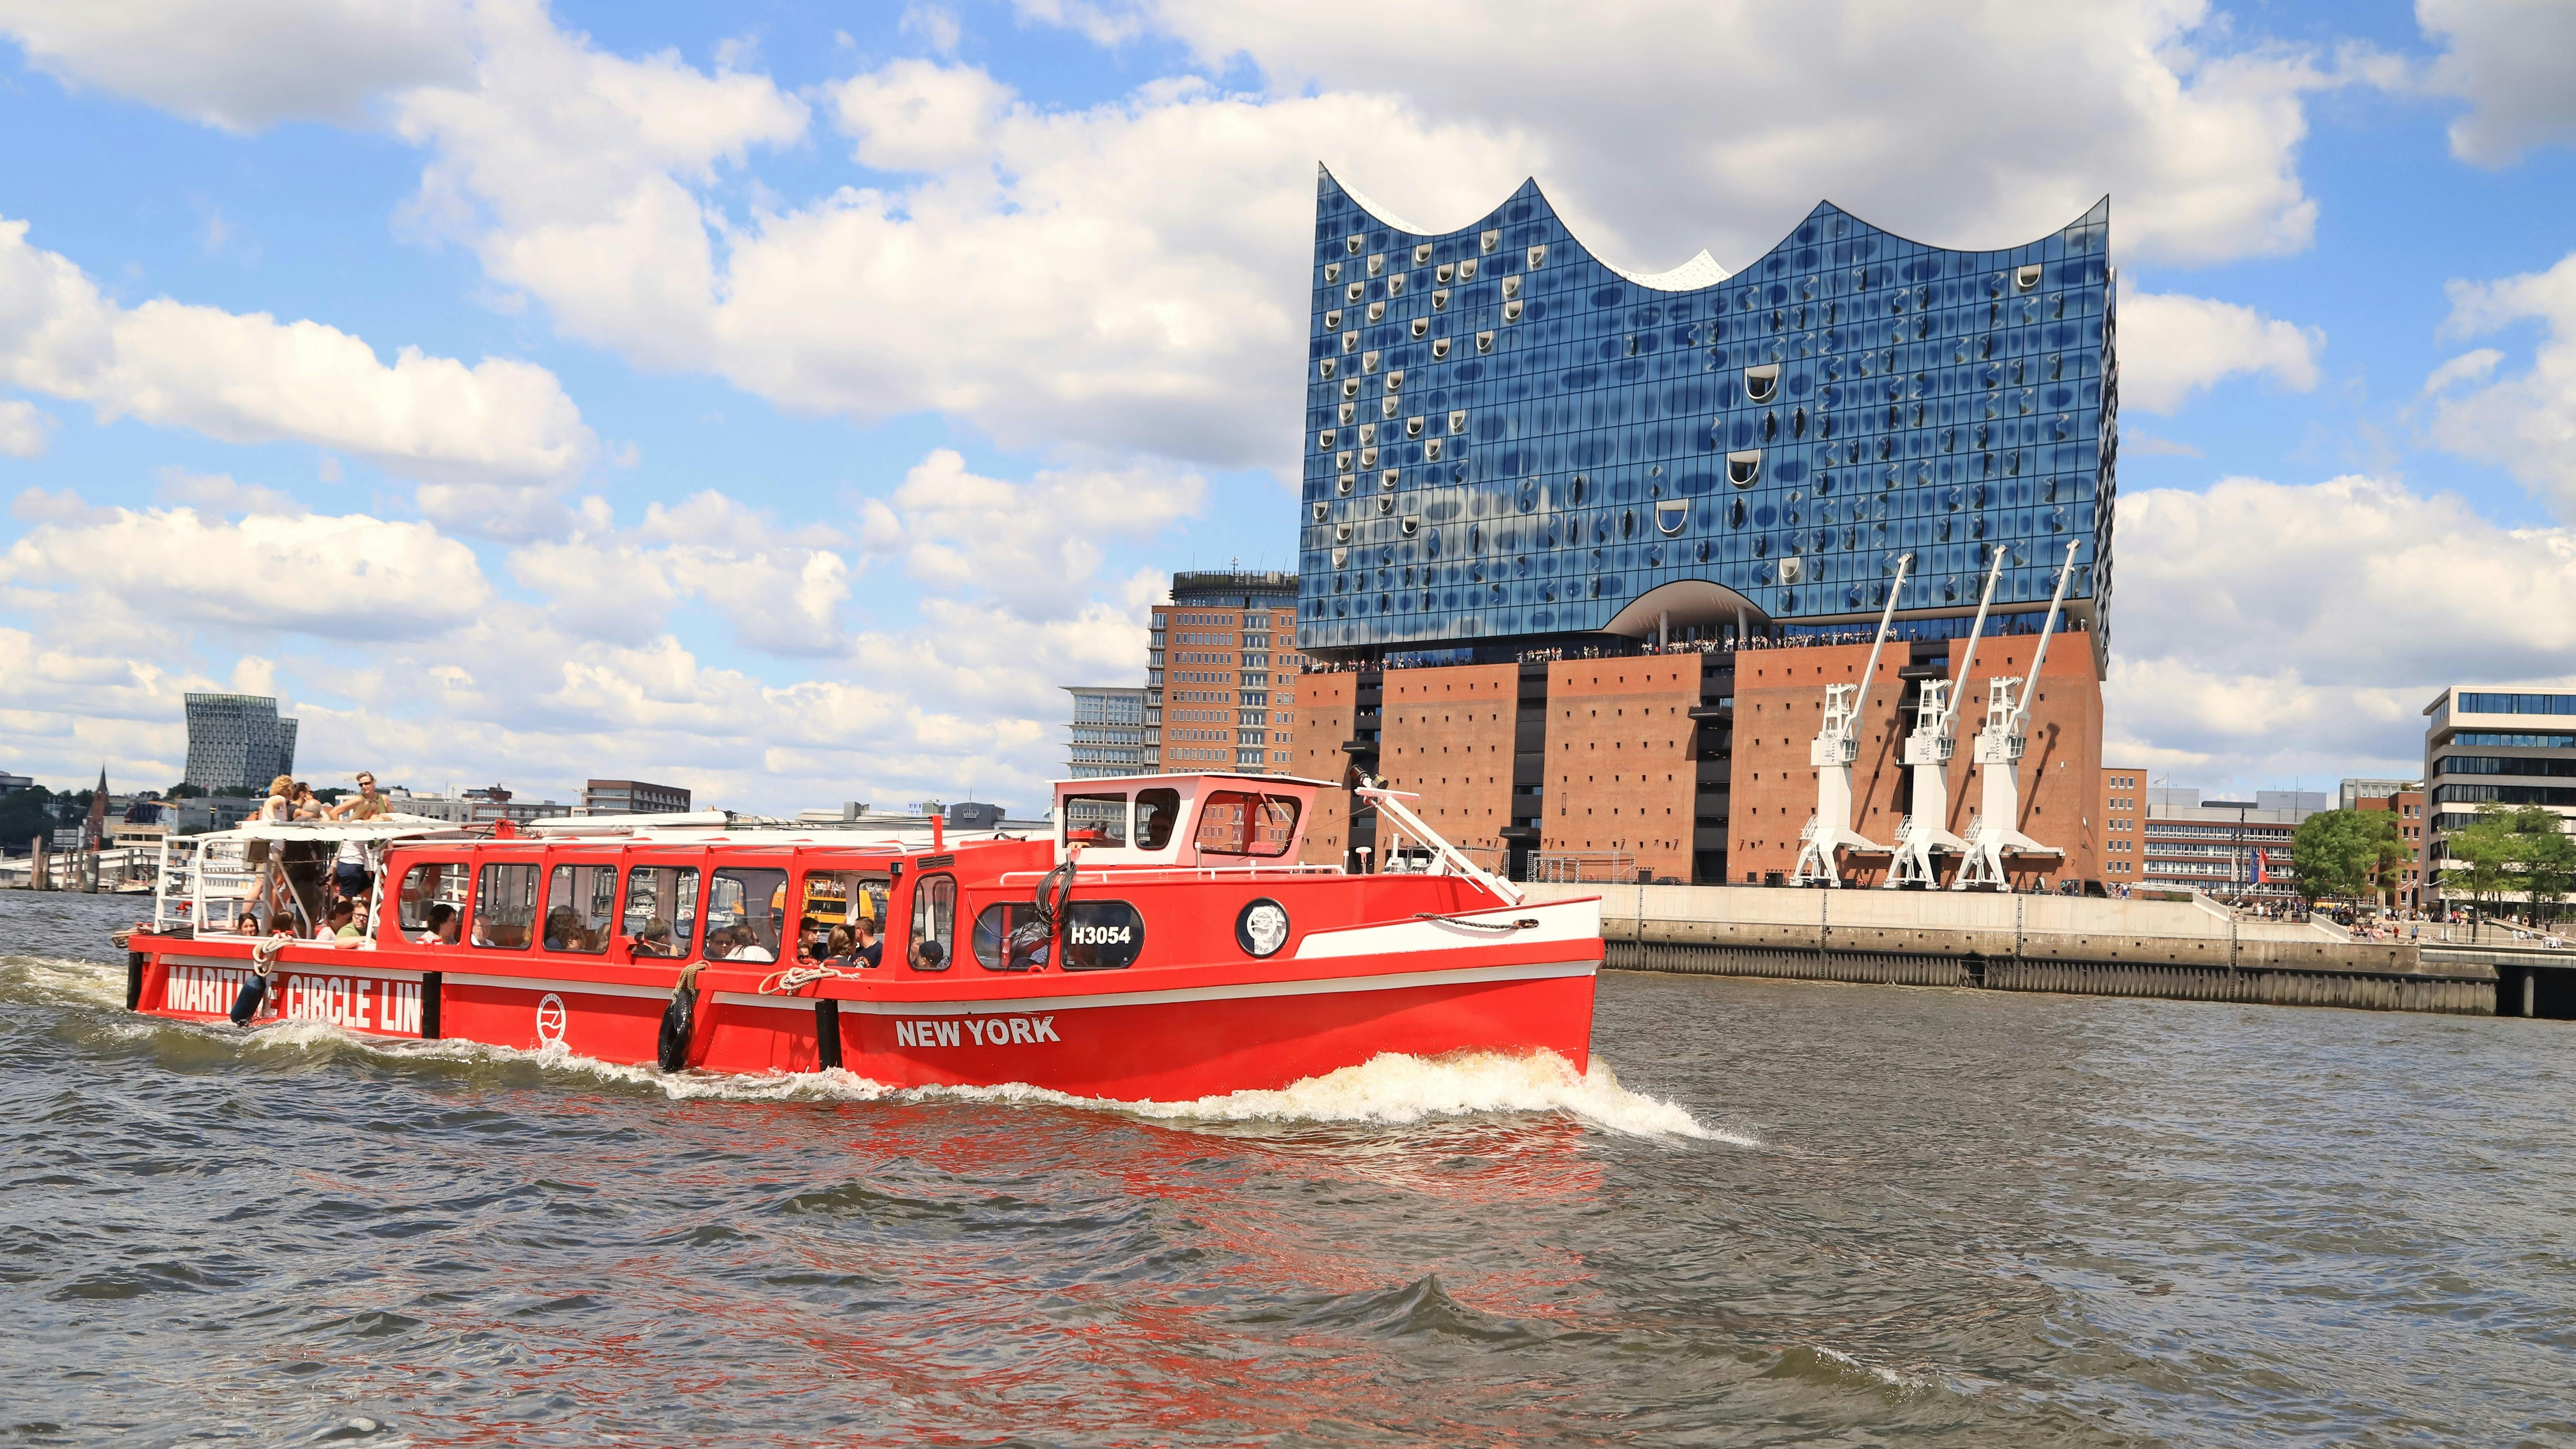 Hop on off boat tour in Hamburg Musement